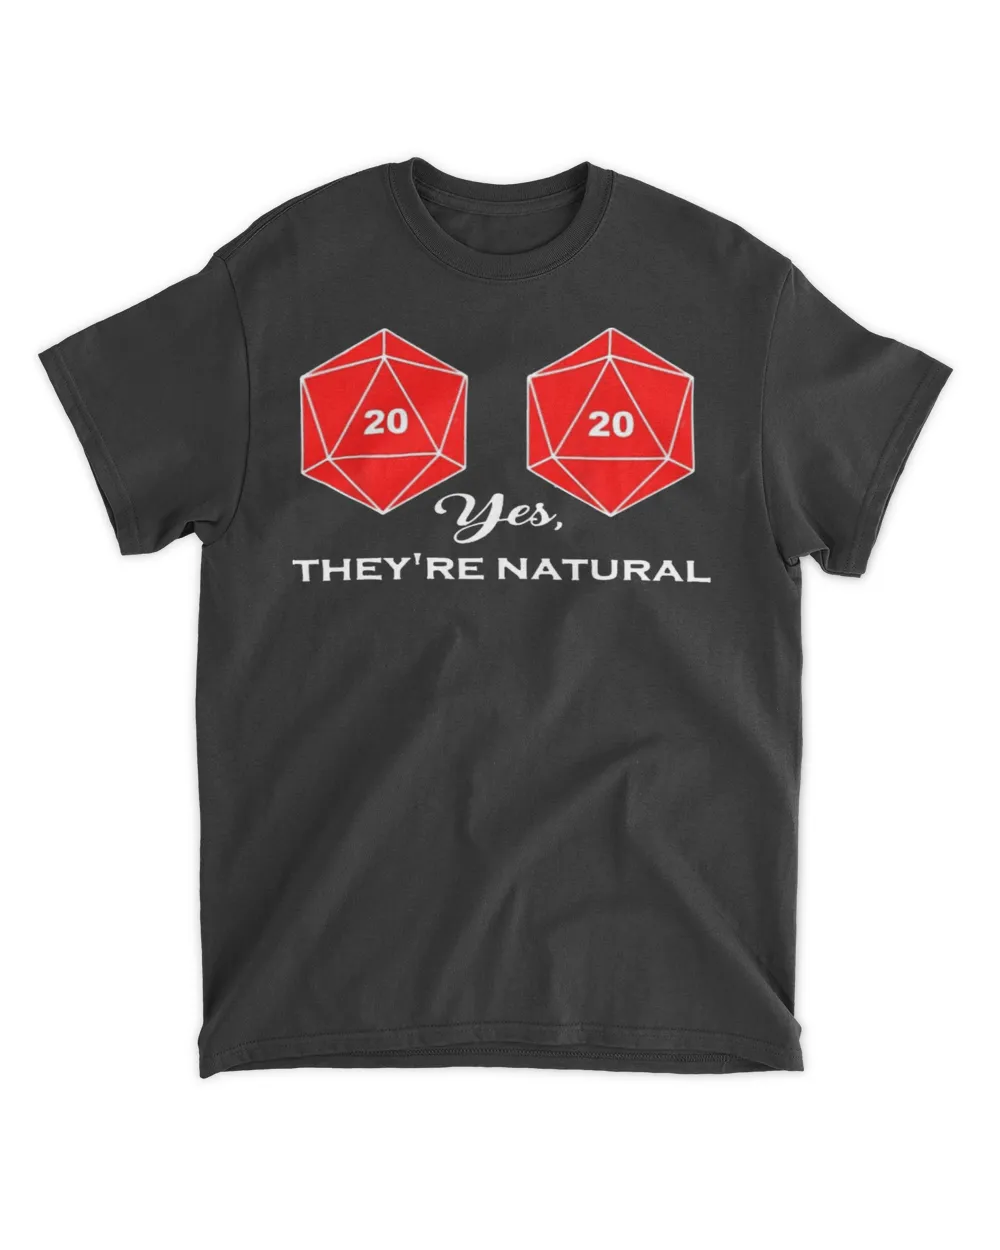  Yes they're natural shirt